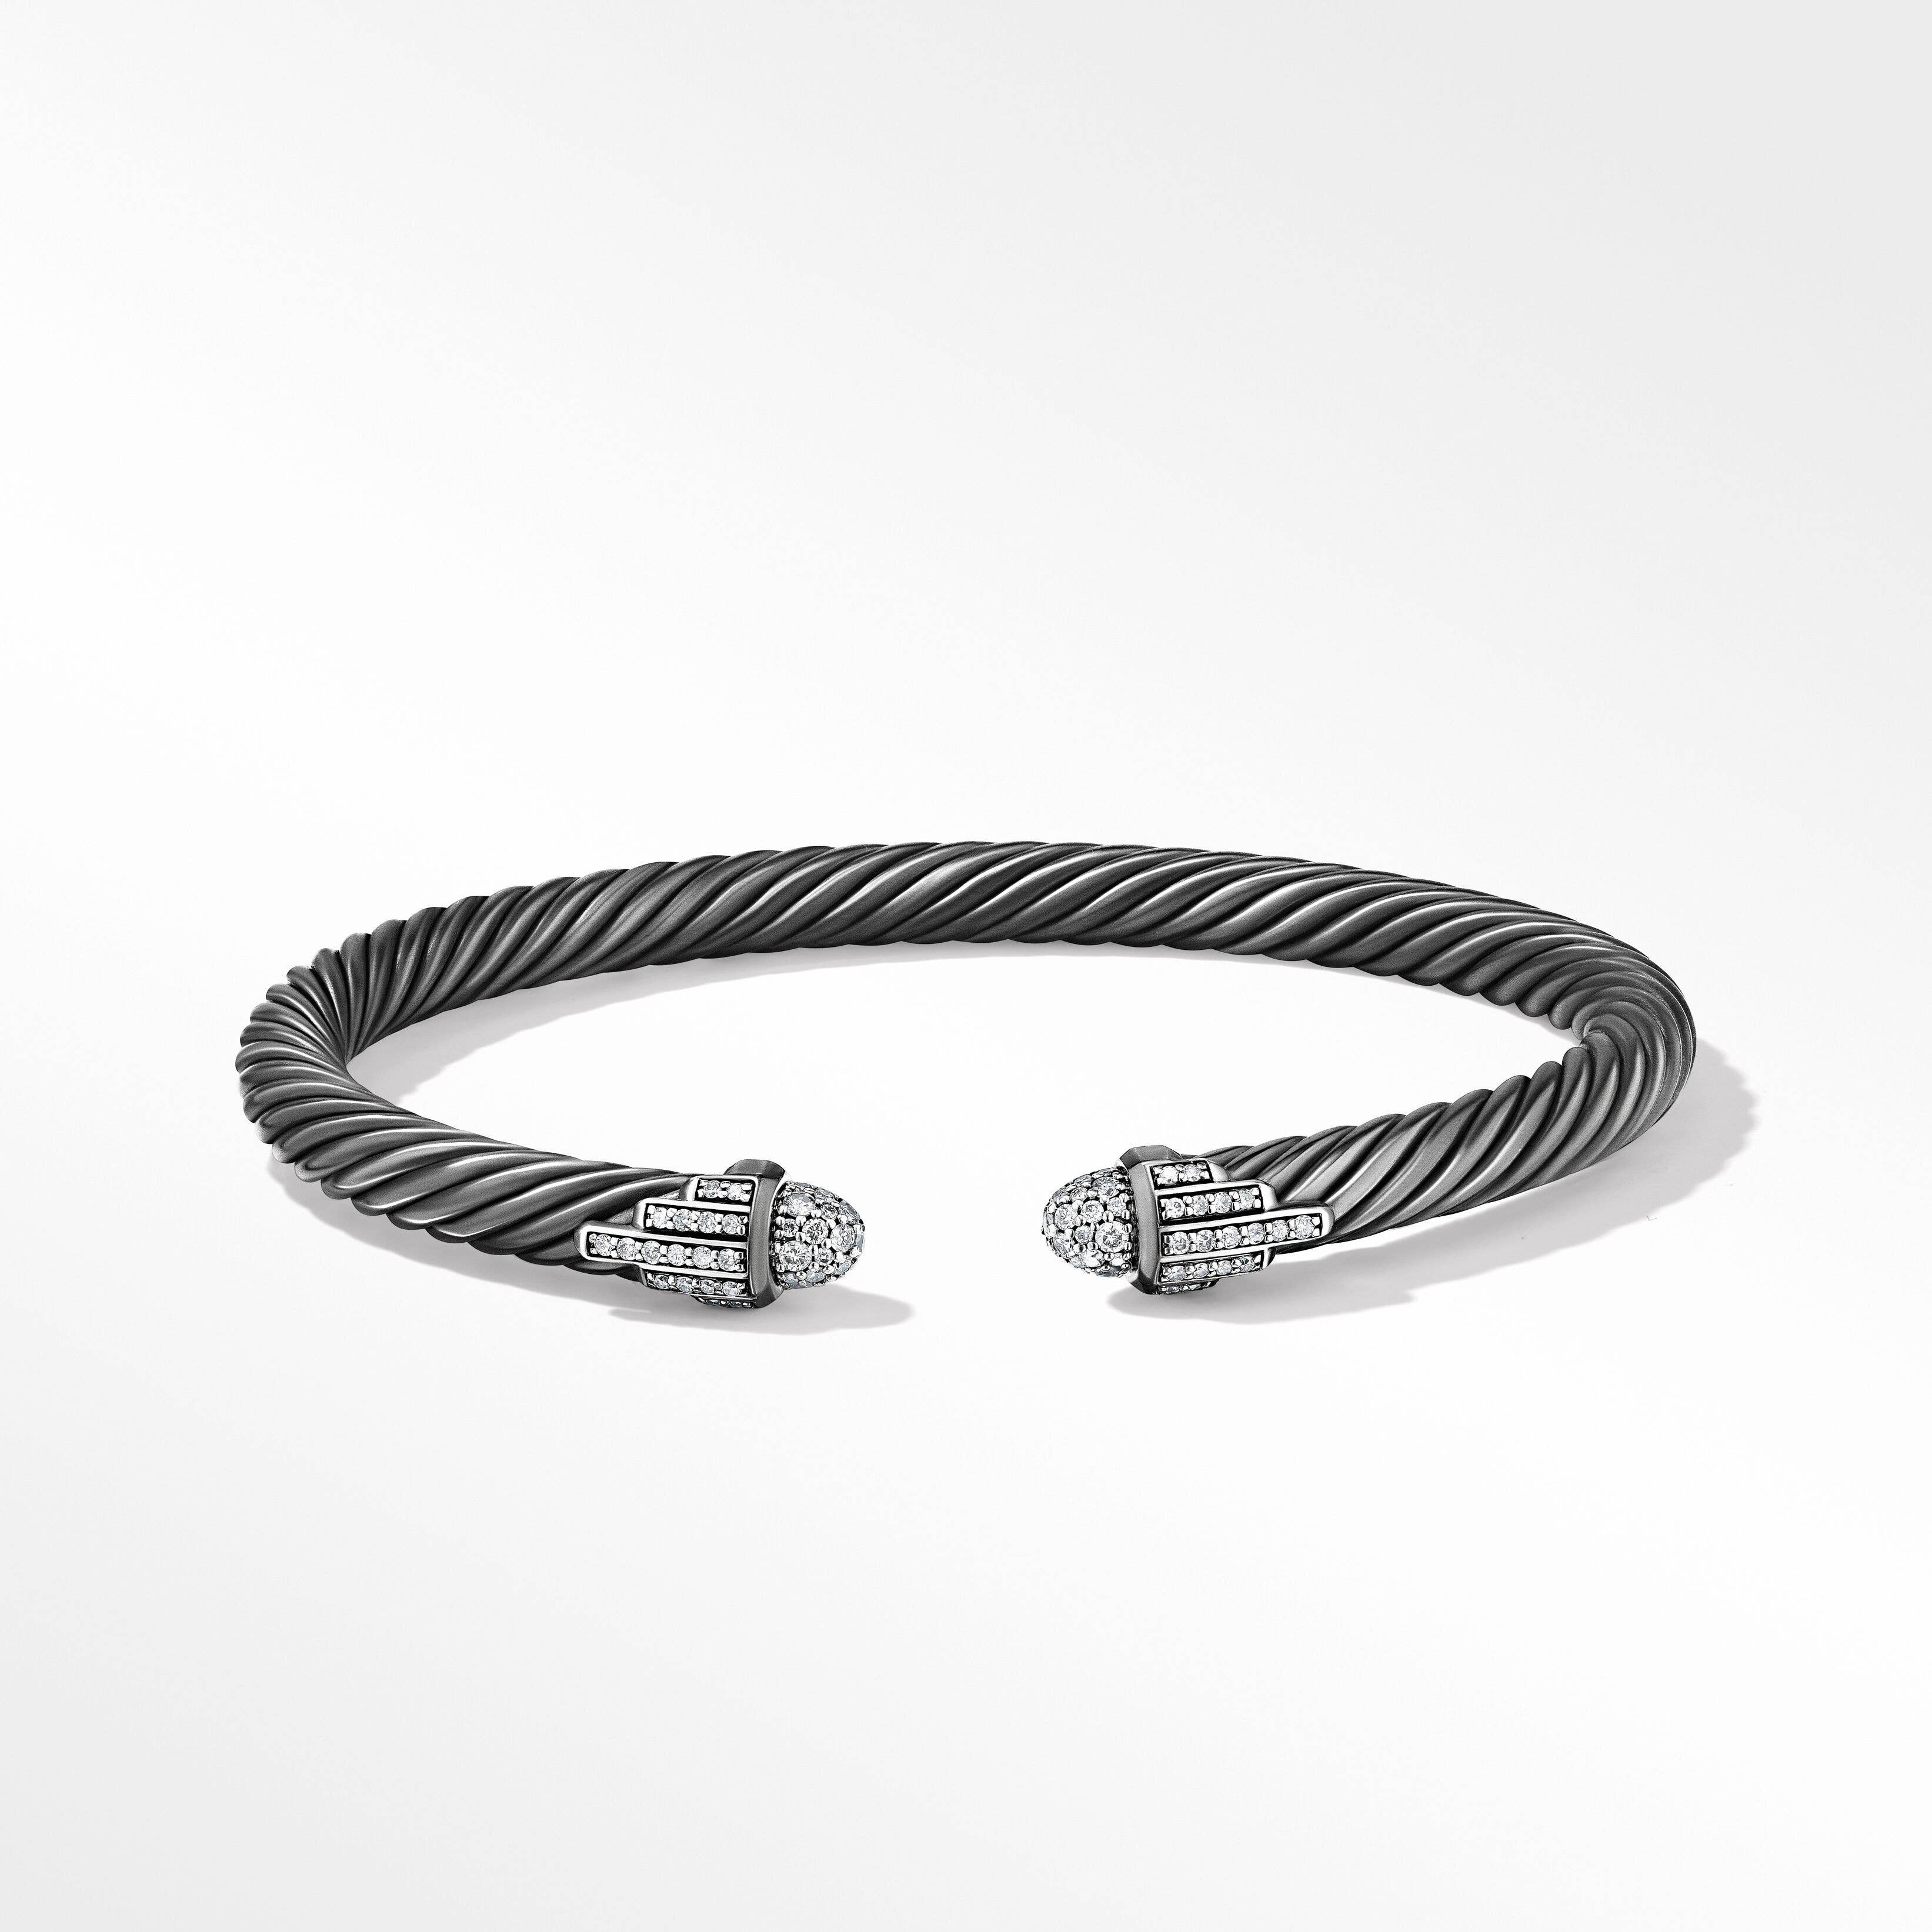 Empire Cable Bracelet in Blackened Silver with Pavé Diamonds